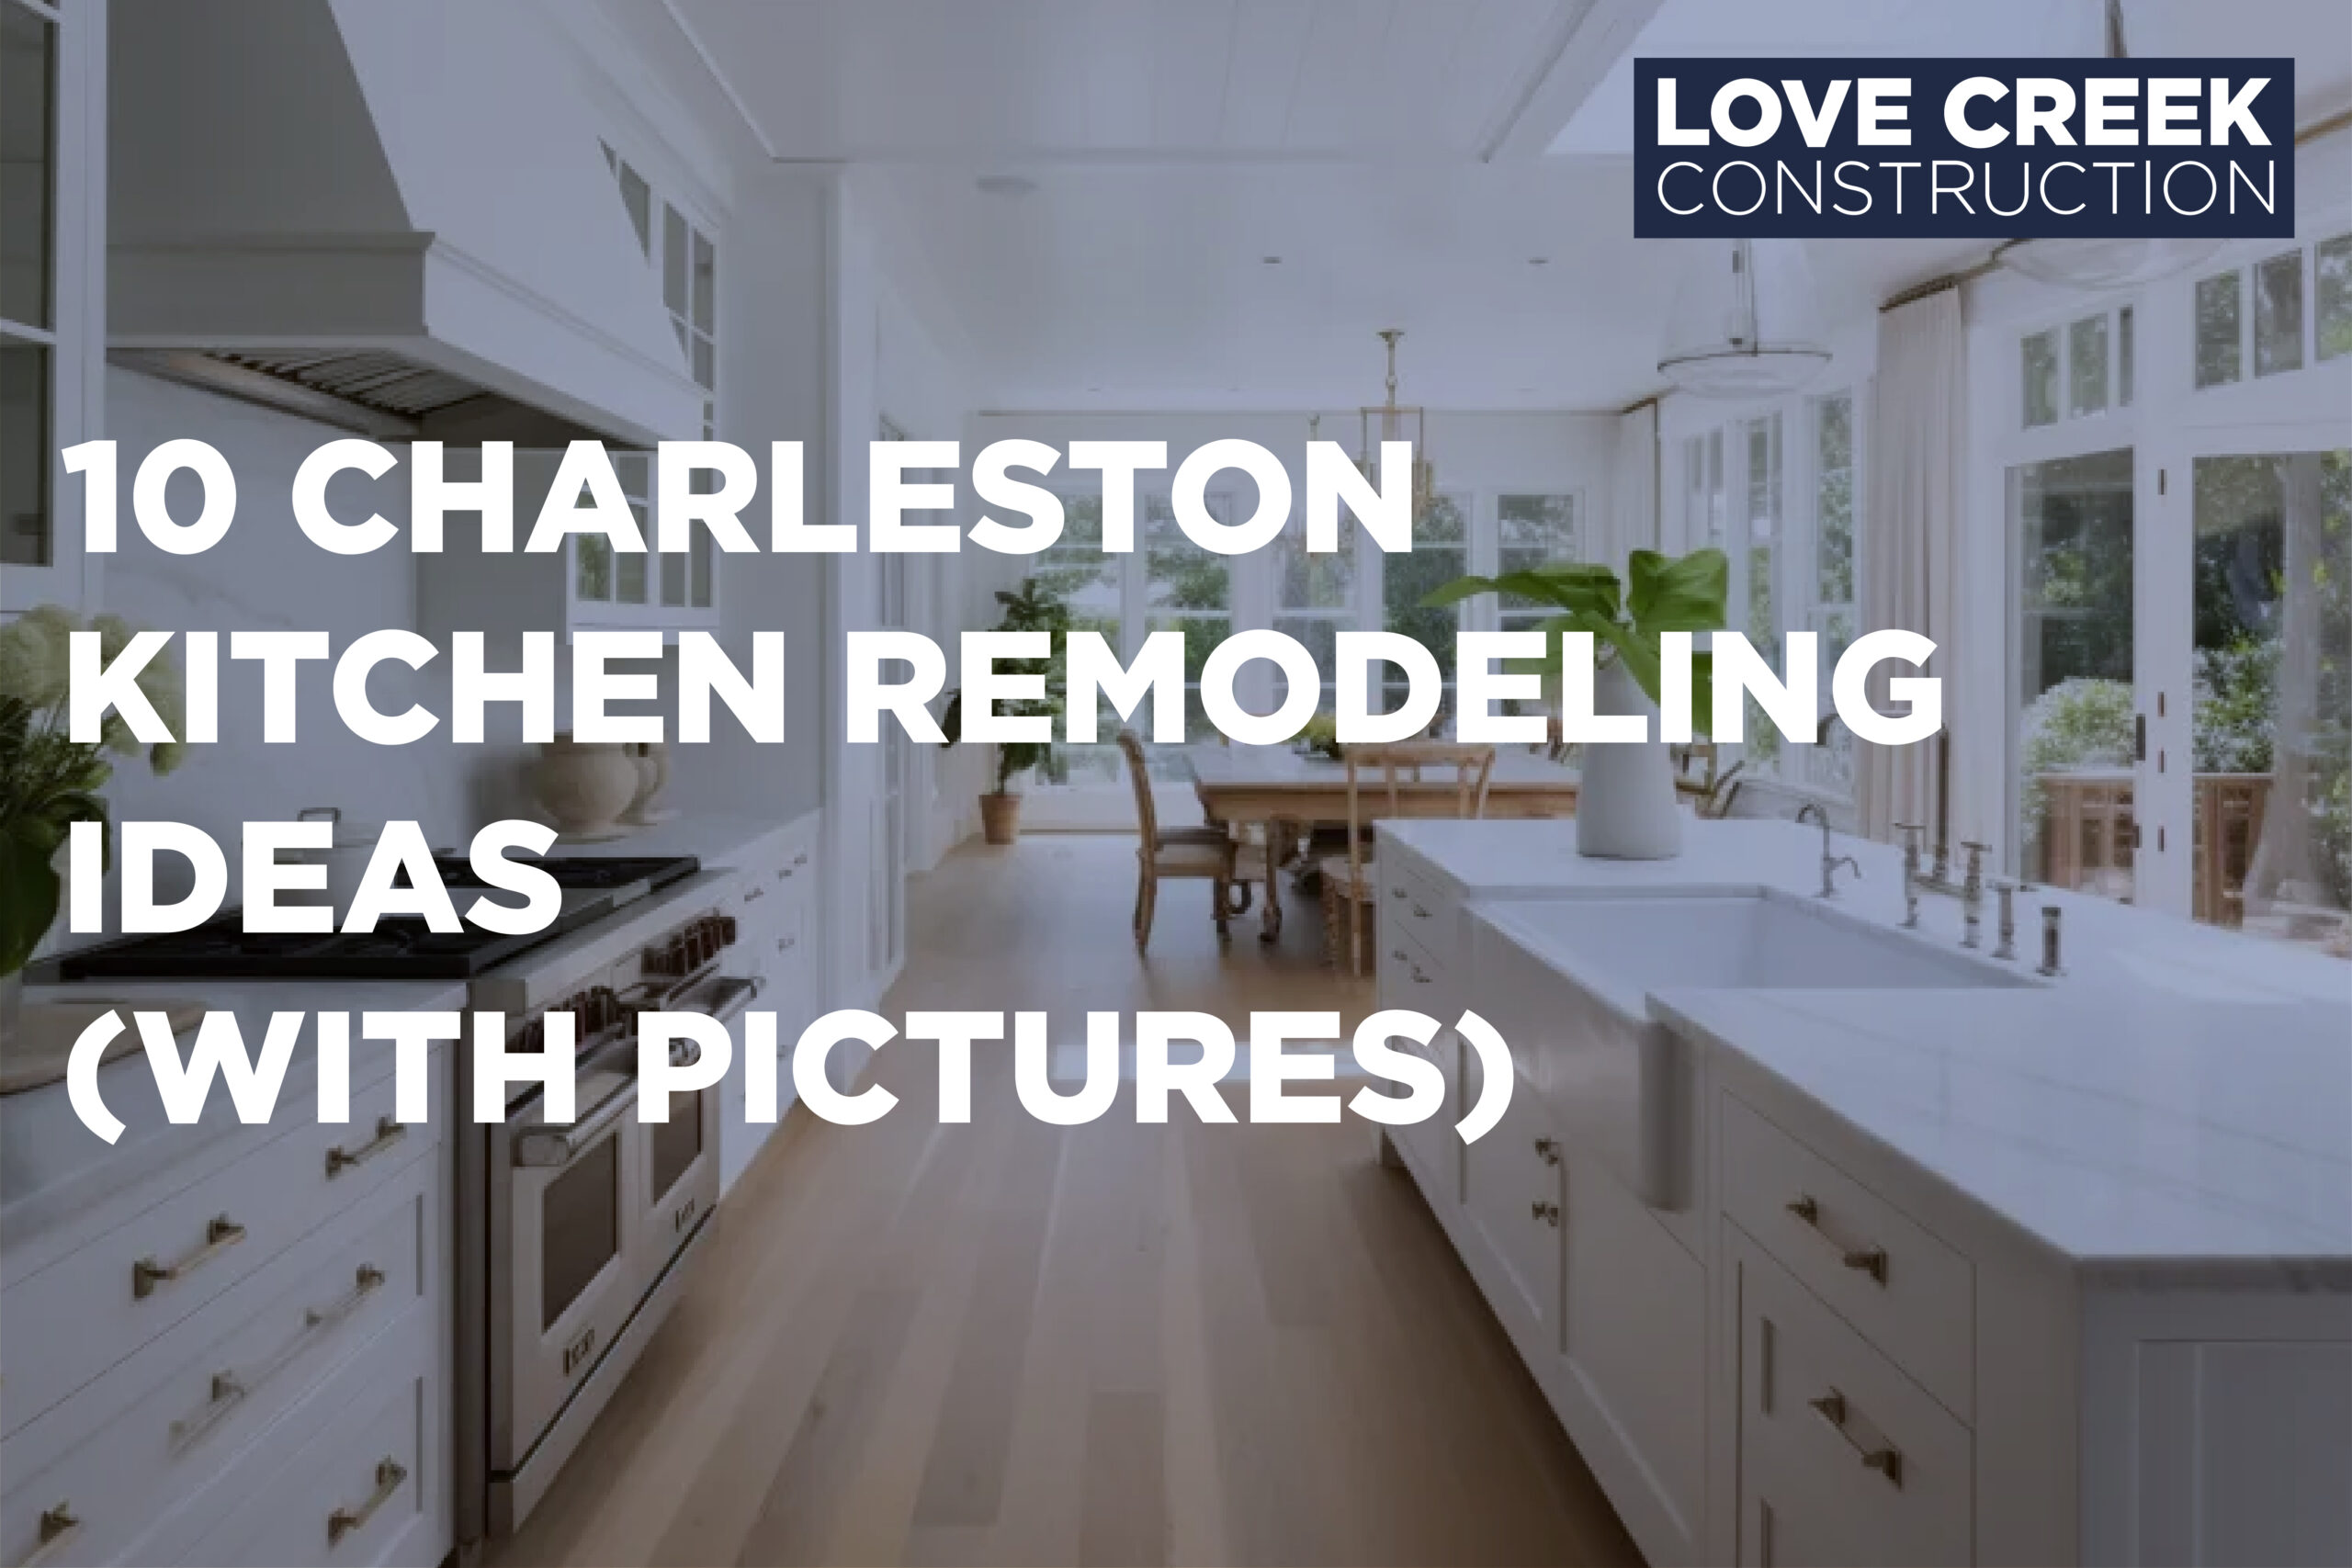 Cover 10 Charleston Kitchen Remodeling Ideas (WITH PICTURES)